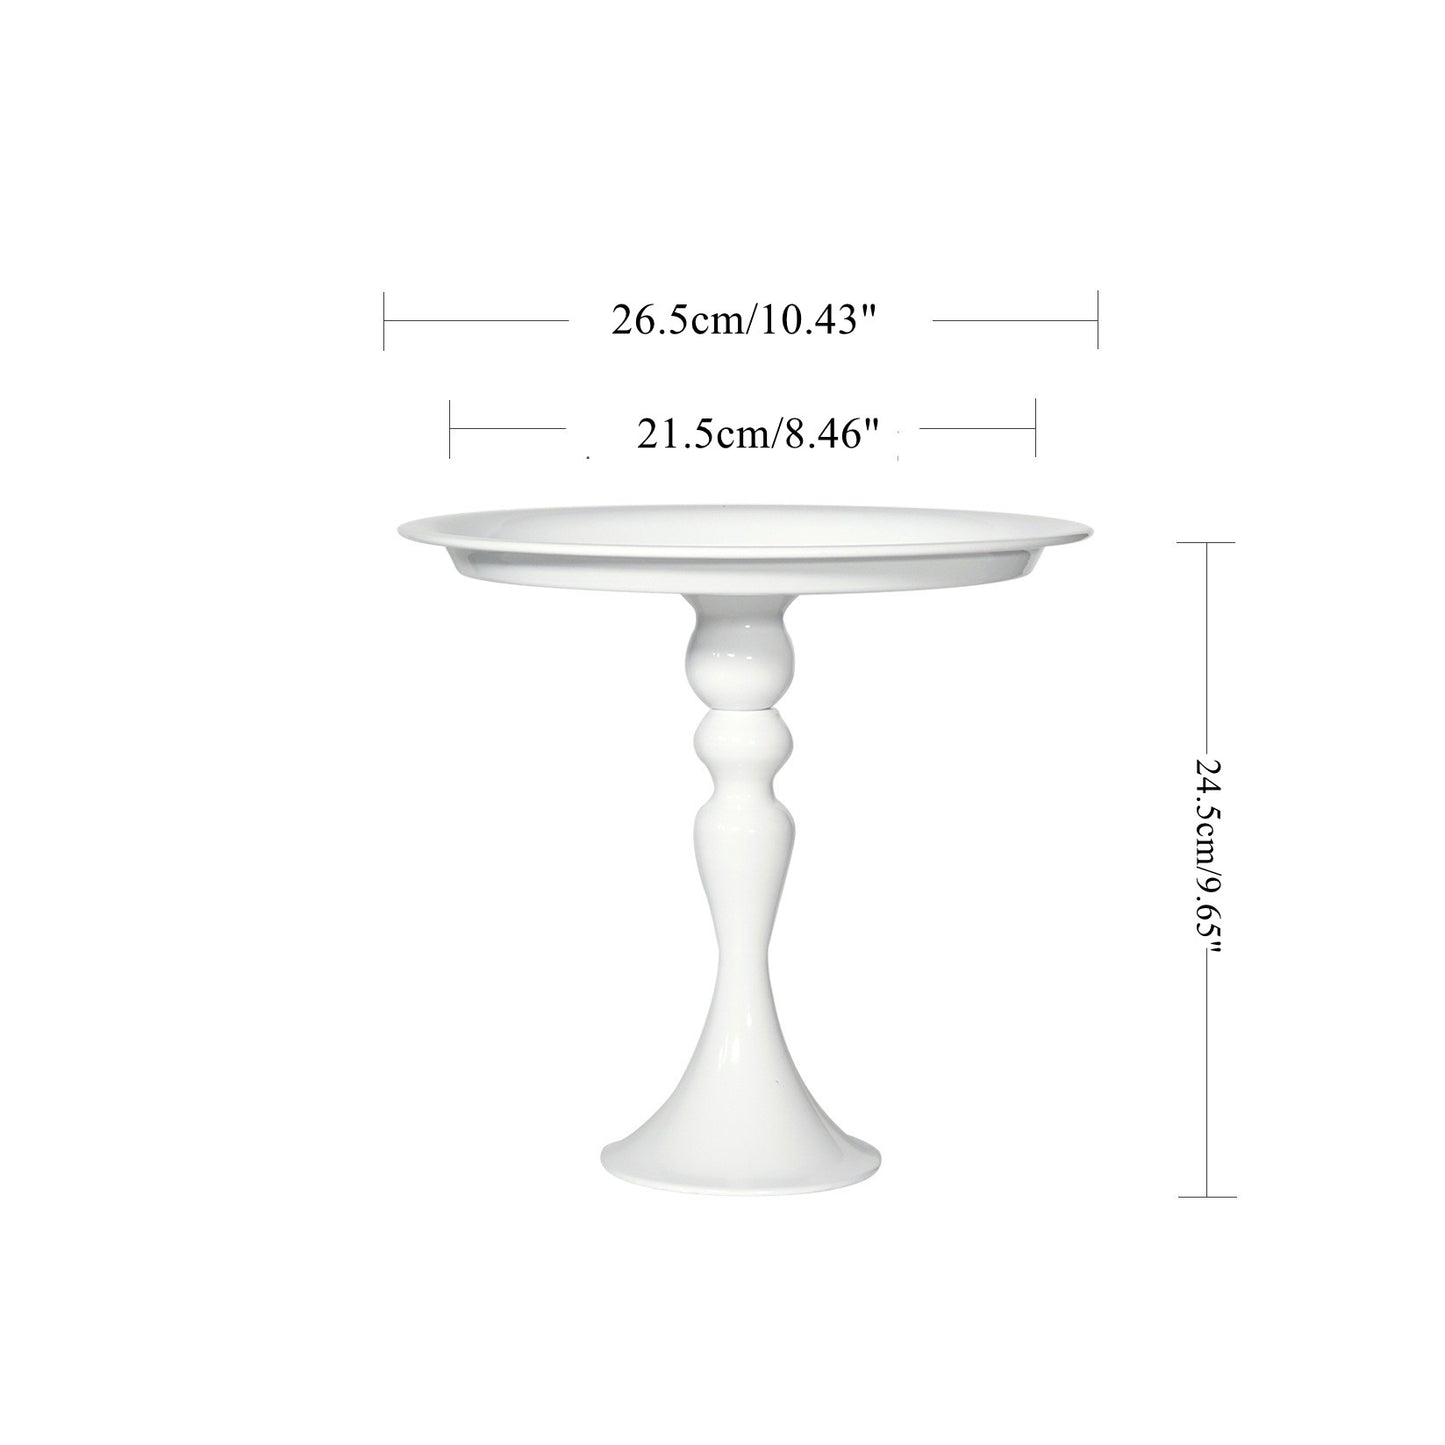 THE DETAILED CAKE STAND